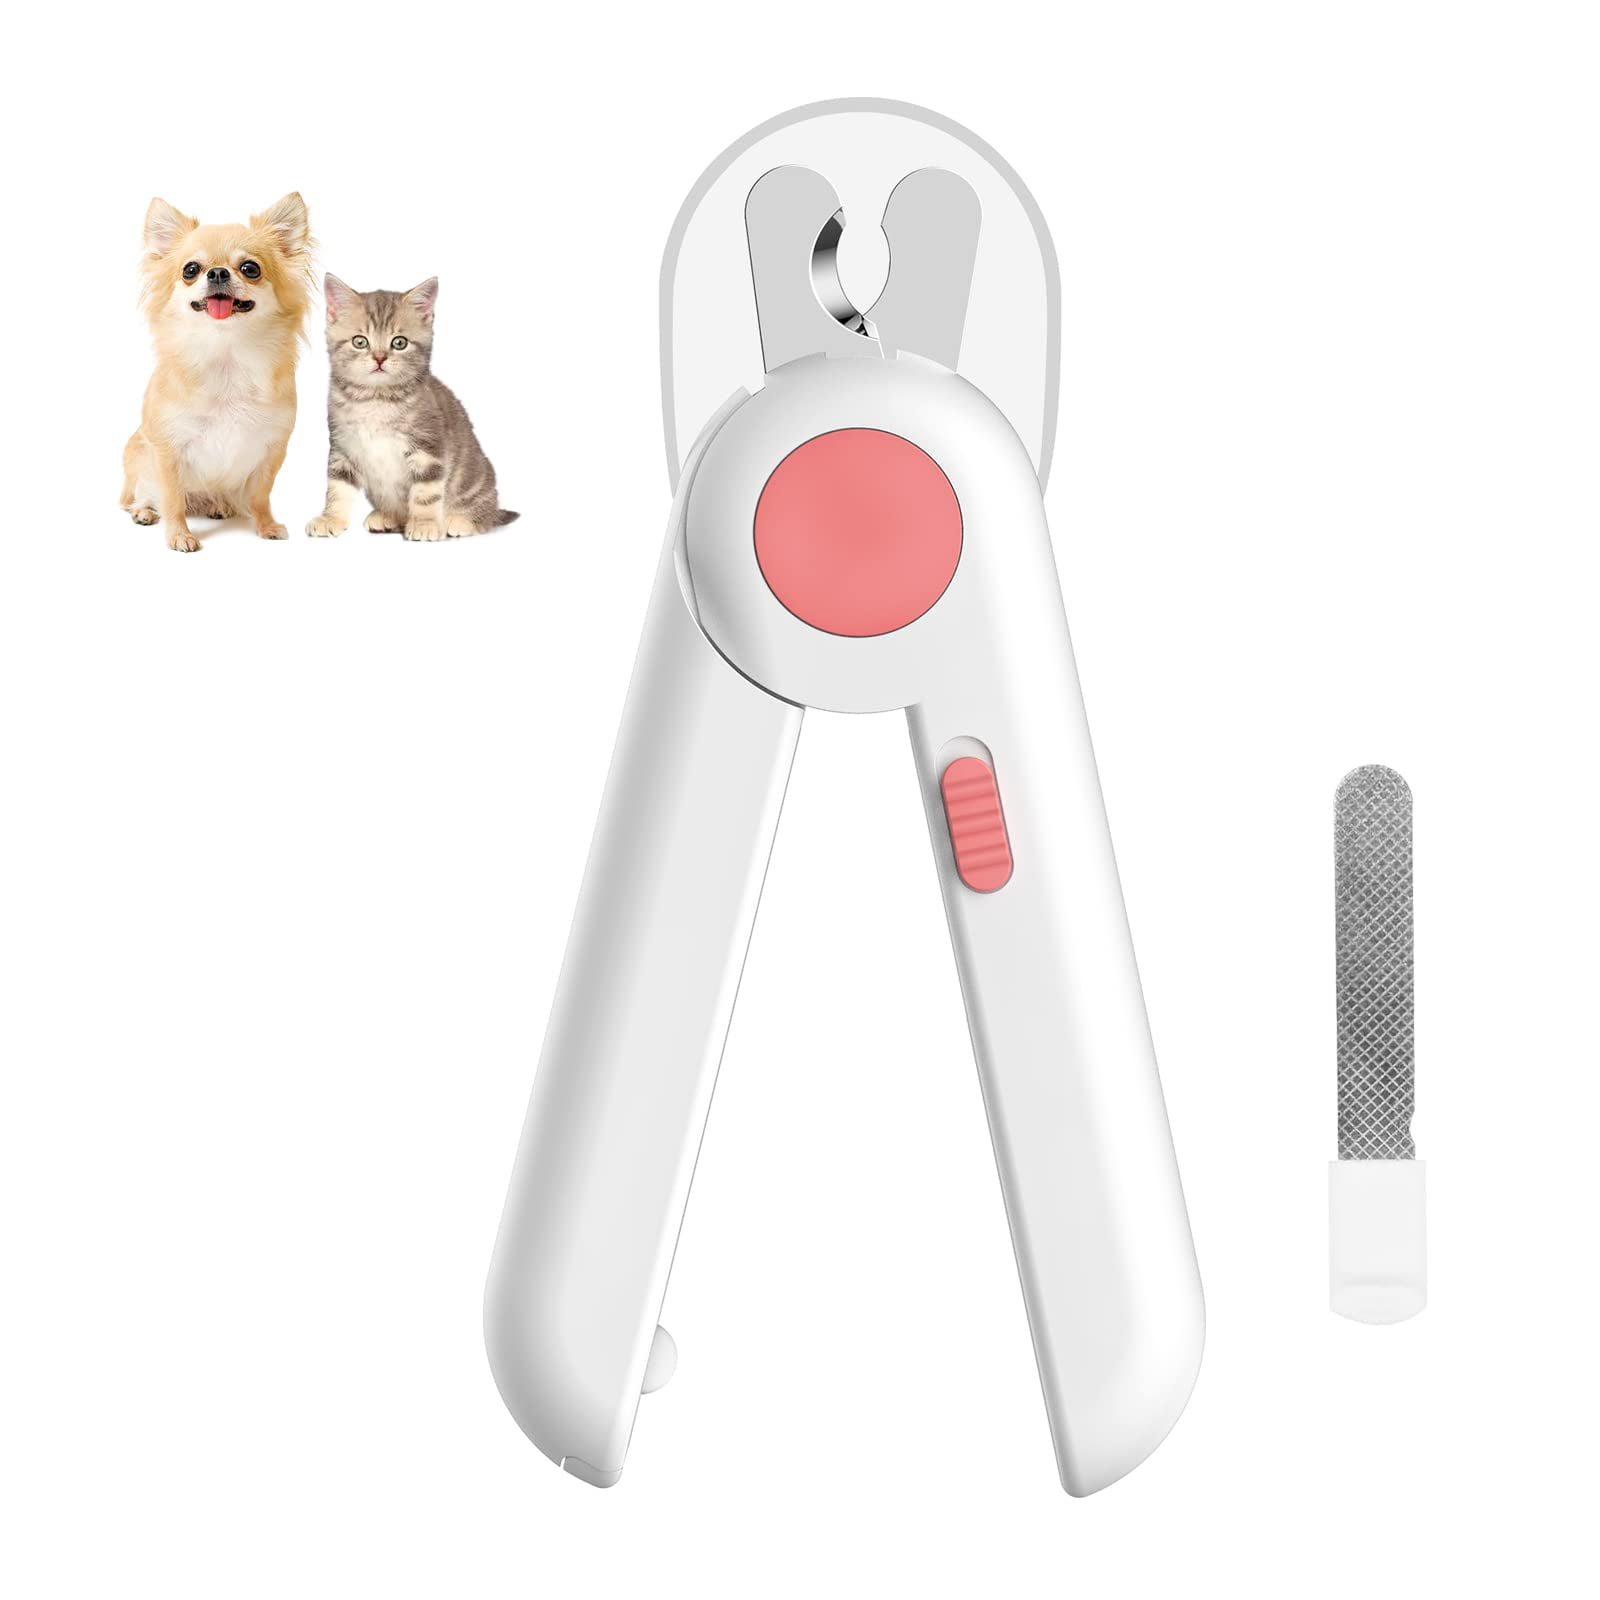 Nail Clippers Toe Claws Trimmer LED Light Cutter Pet Dog Cat 5X  Magnification | eBay